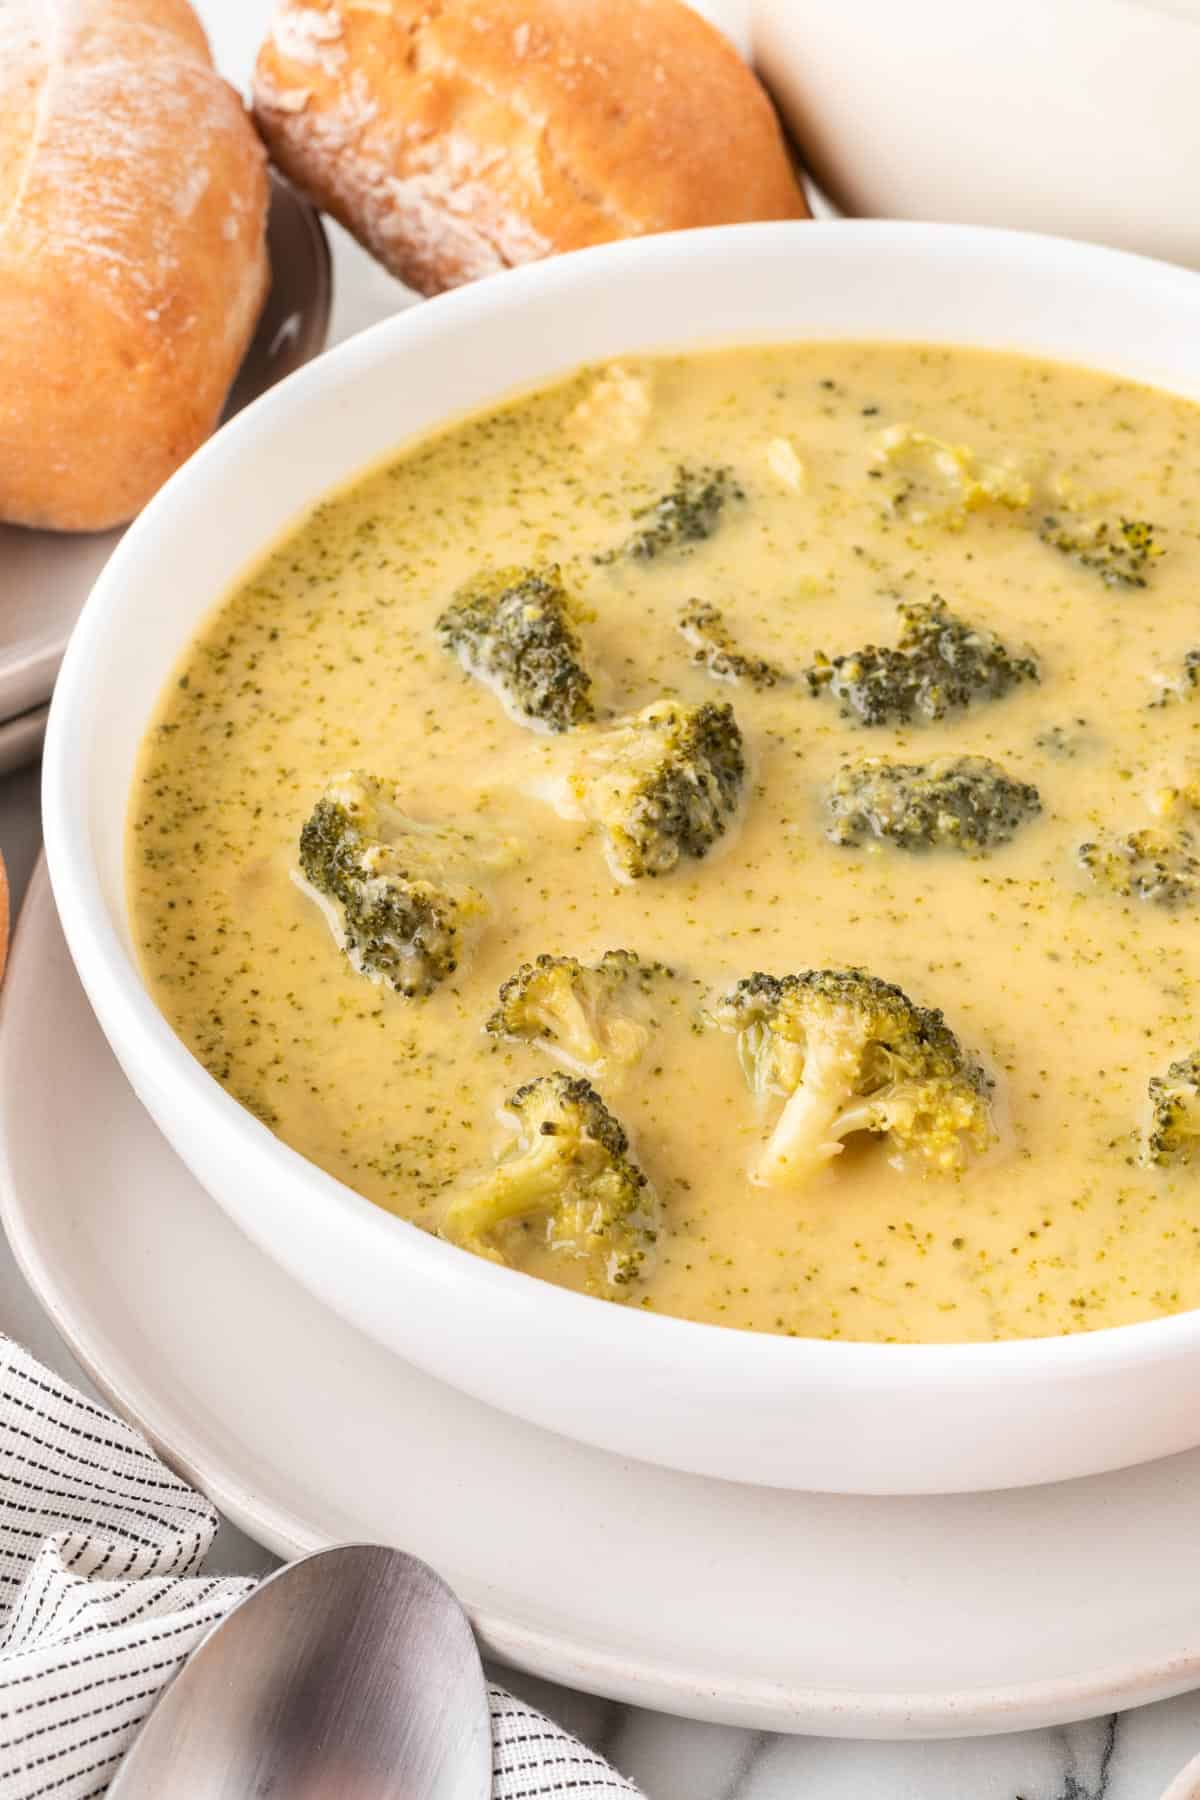 A photo of the left side of a bowl of broccoli soup.